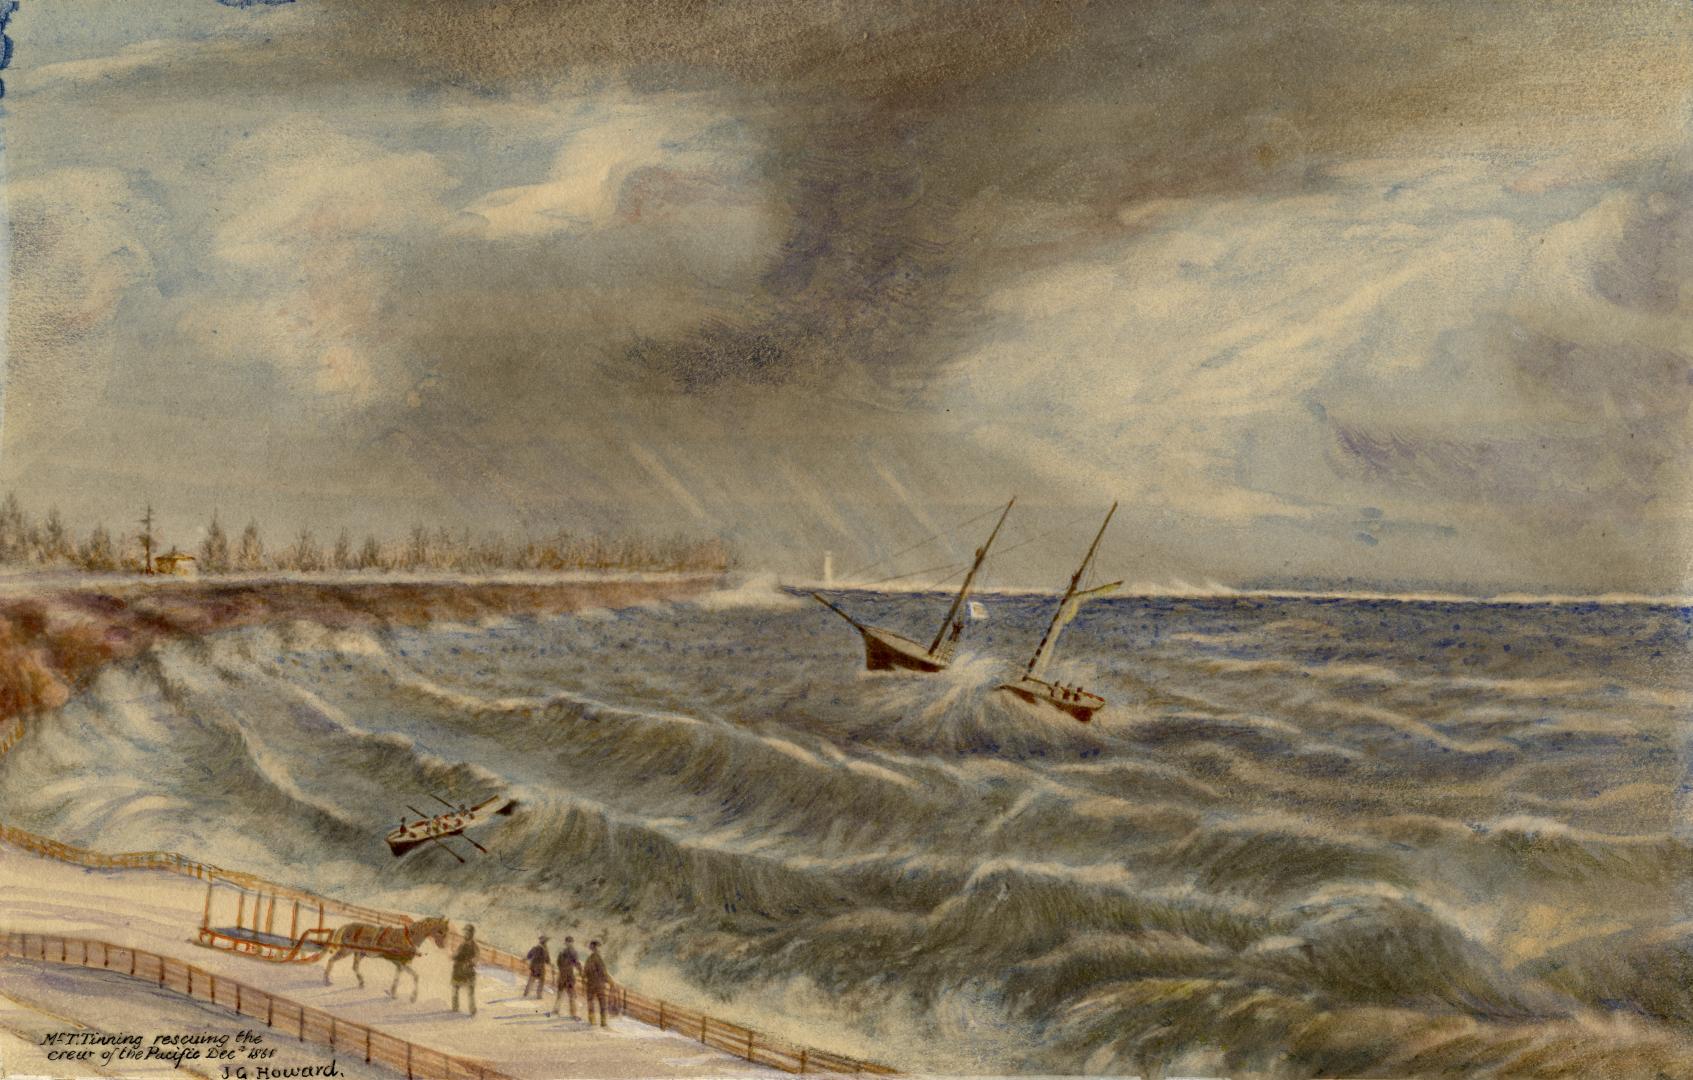 Pacific, schooner, rescue of crew by Thomas Tinning, looking southeast from shore near High Park